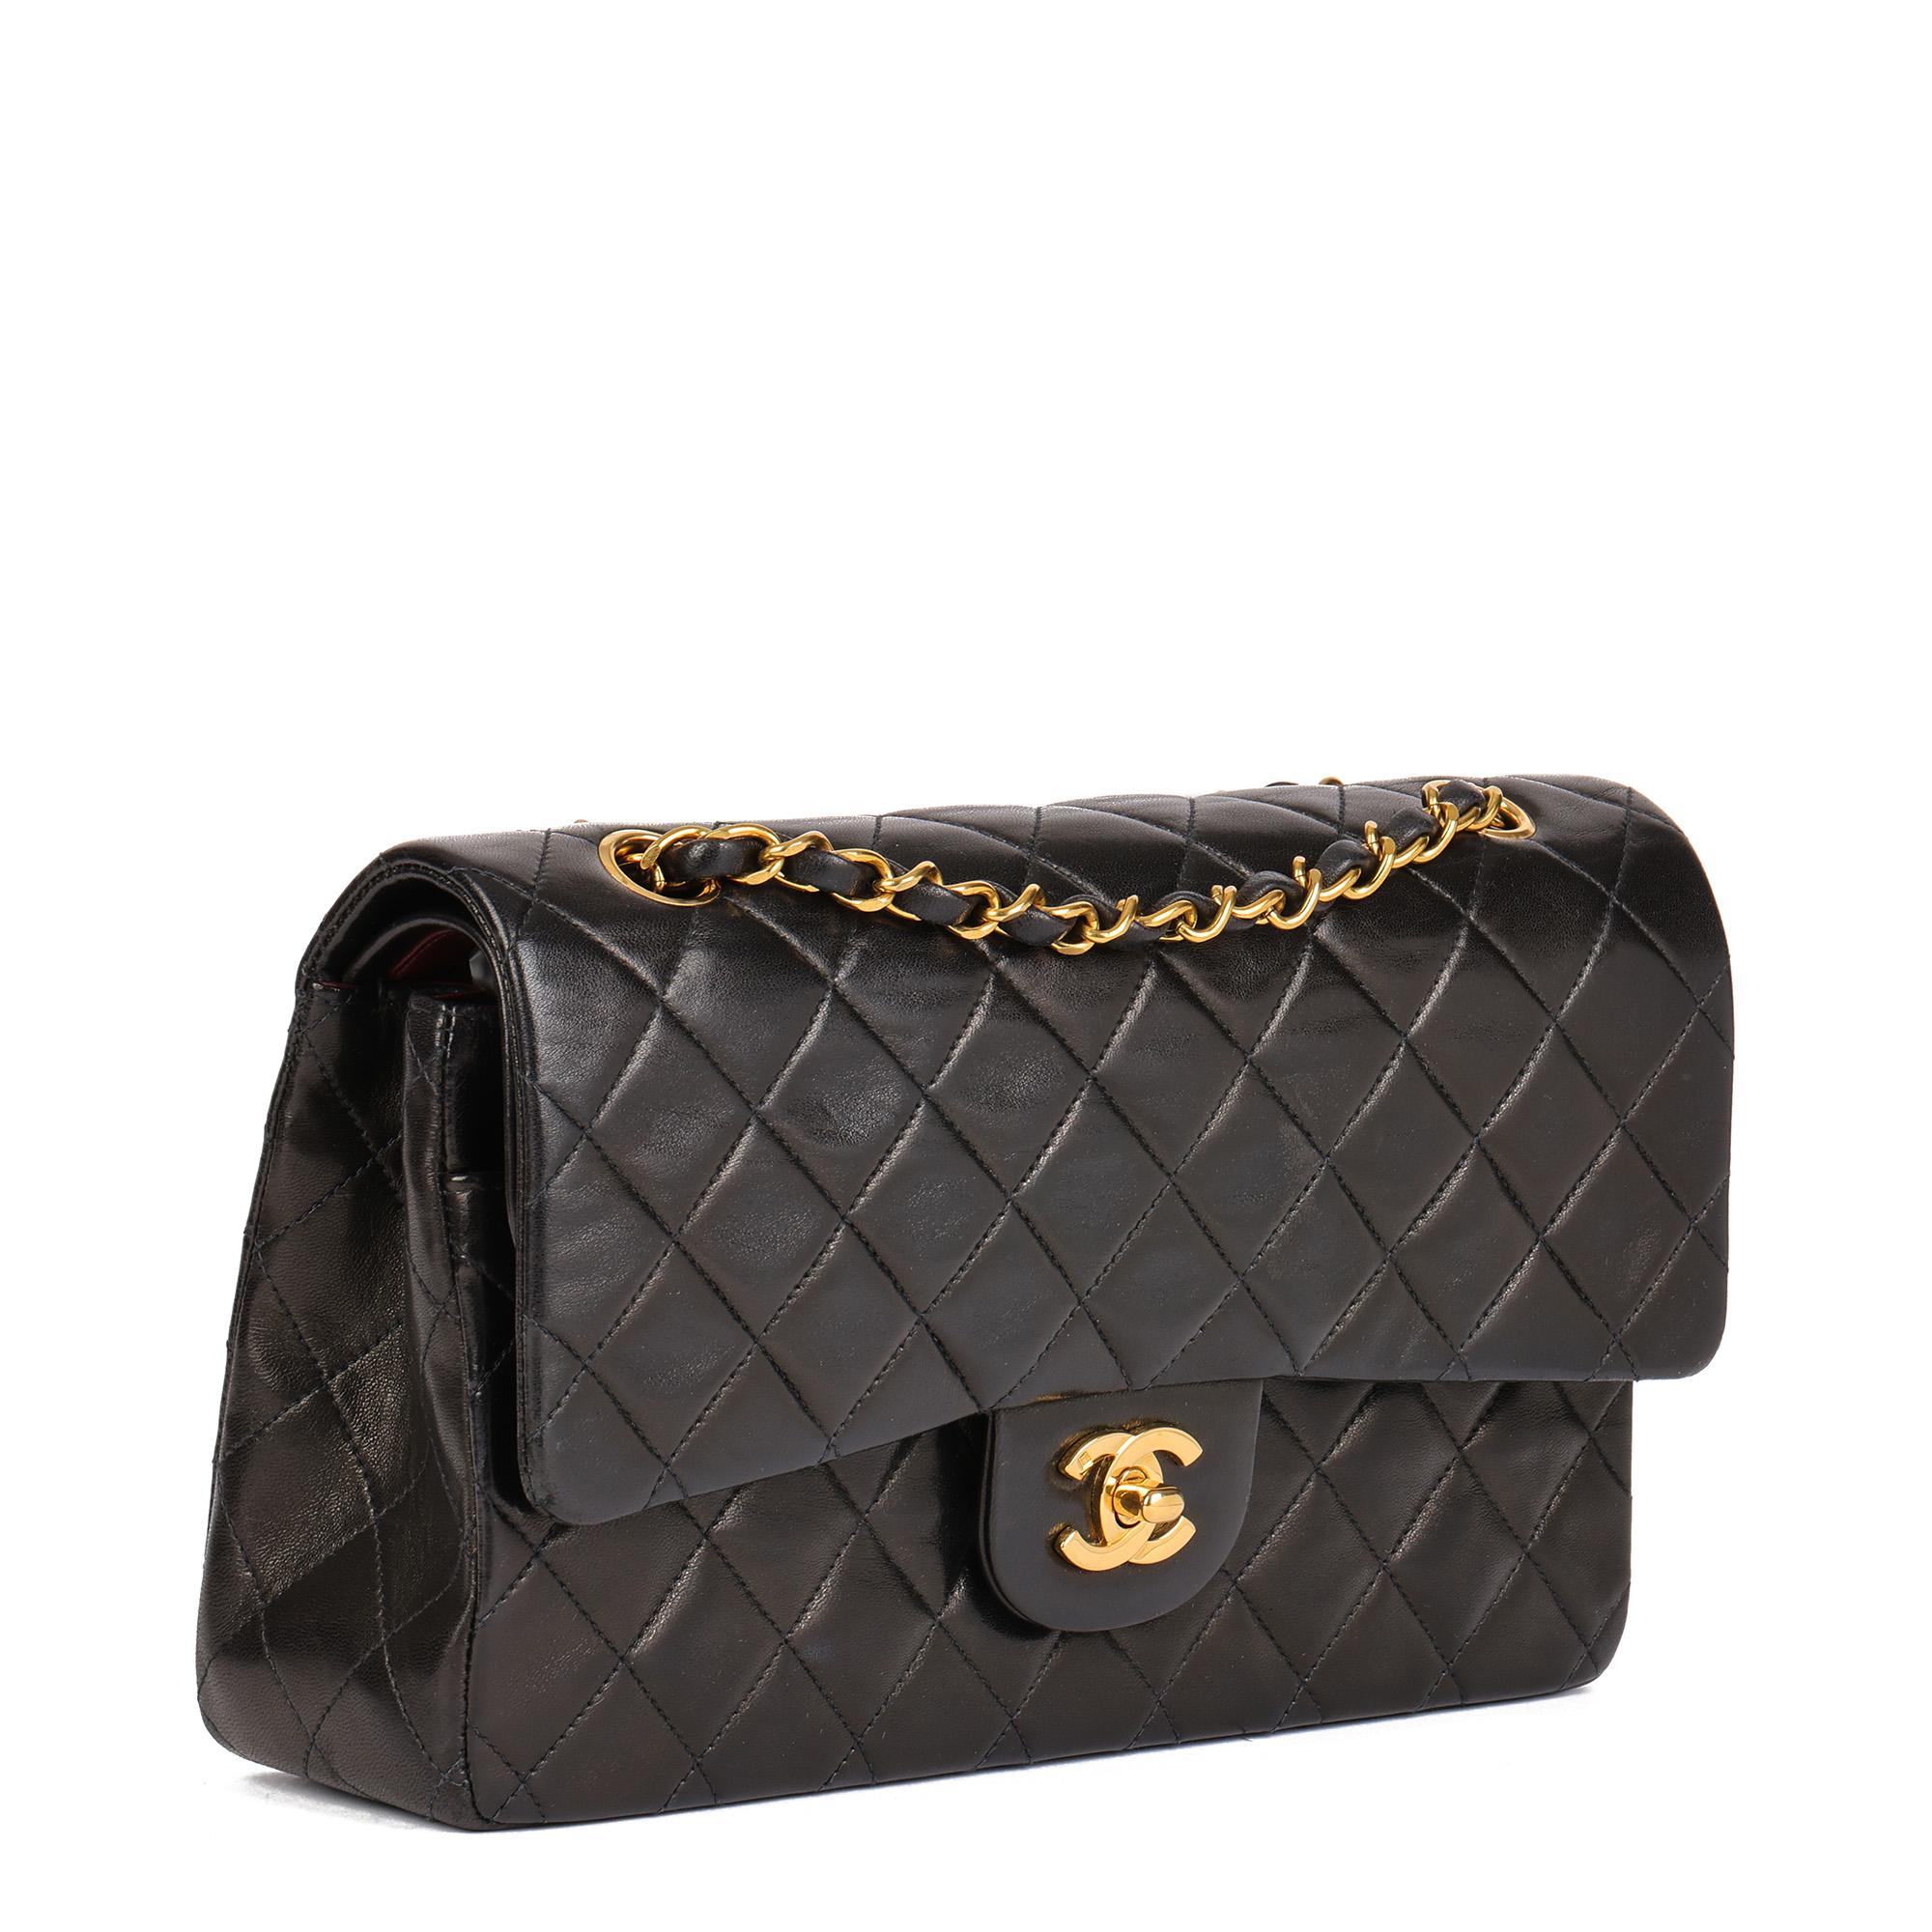 CHANEL
Black Quilted Lambskin Vintage Medium Classic Double Flap Bag 

Serial Number: 3227250
Age (Circa): 1994
Accompanied By: Chanel Dust Bag
Authenticity Details: Serial Sticker (Made in France)
Gender: Ladies
Type: Shoulder

Colour: